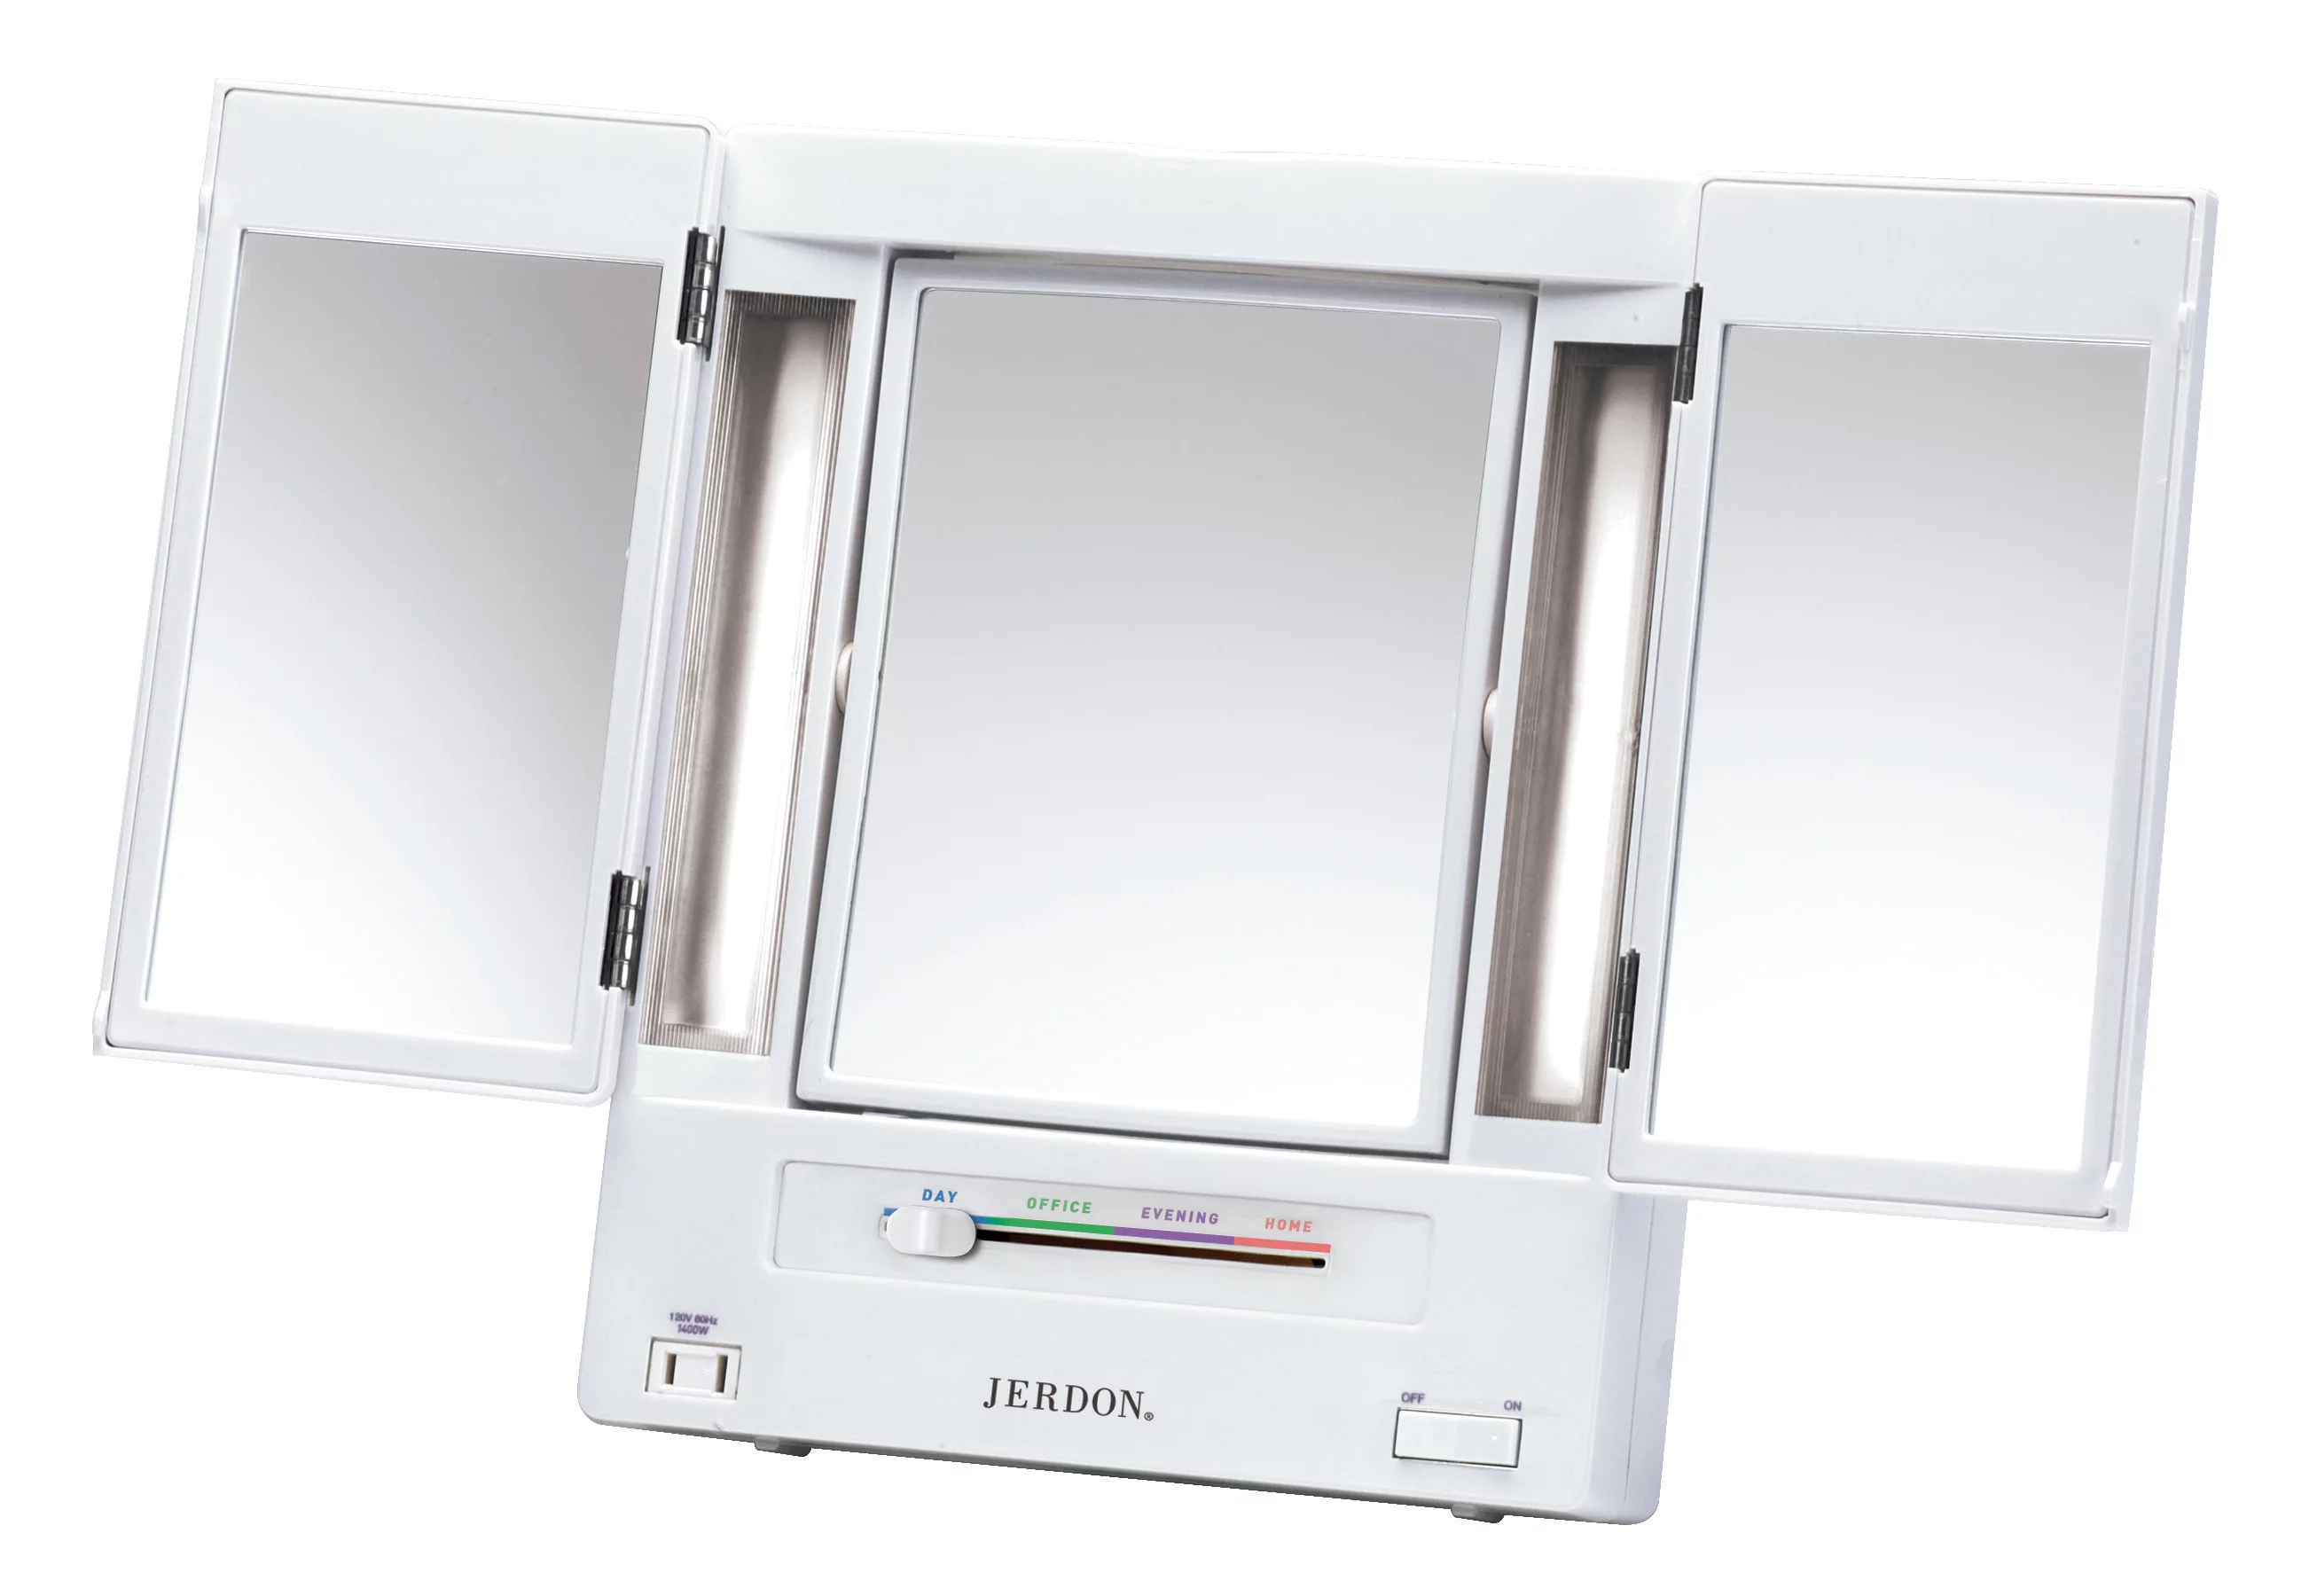 ($50 Value) Jerdon Style Makeup Mirror in White 5x Magnification with Tabletop Tri-Fold 2-Sided Light, 12.75" x 3.75" x 10.75"